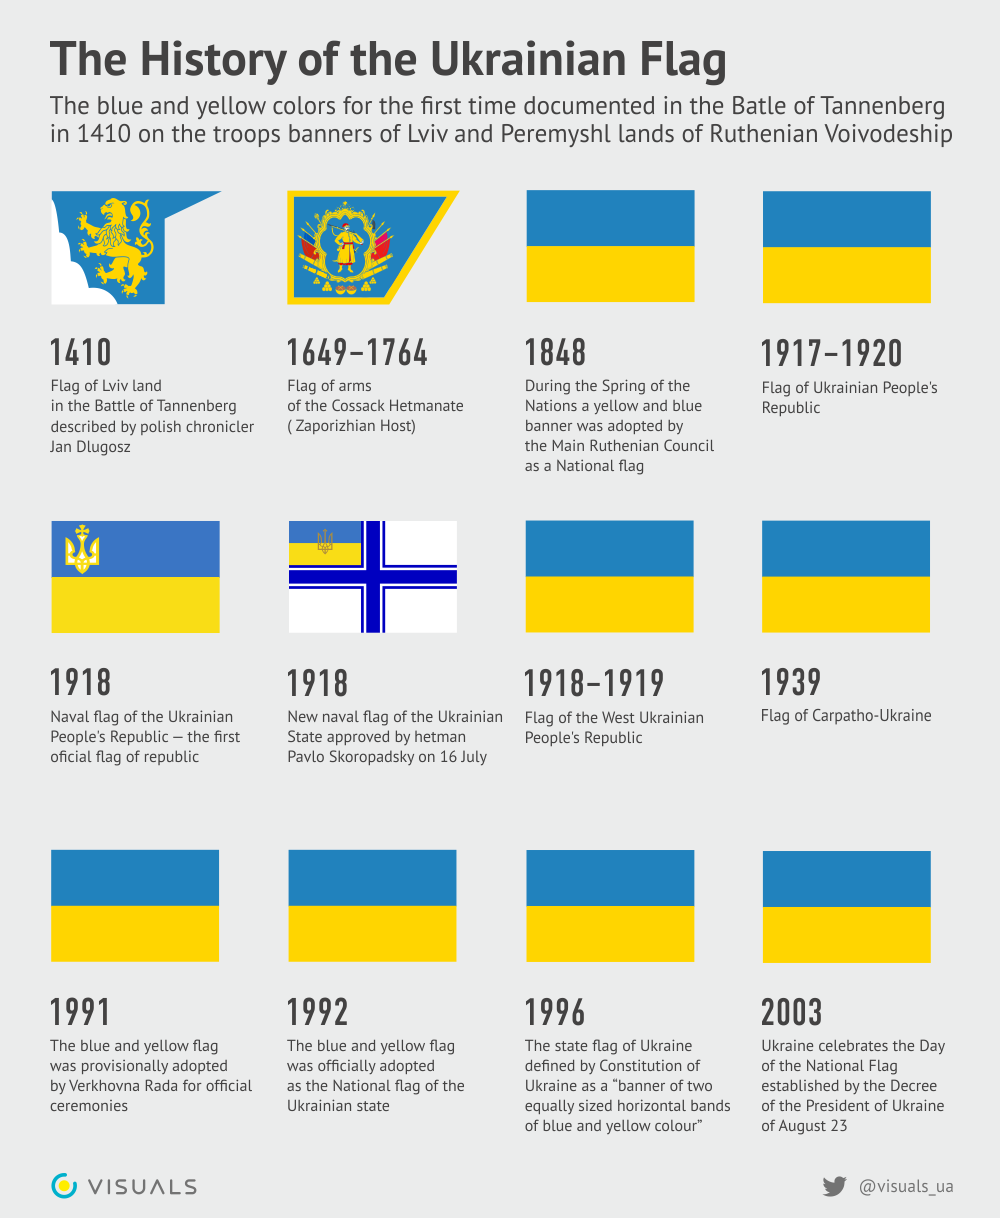 The History of the Ukrainian Flag (Infographic: @Visuals_UA on Twitter)